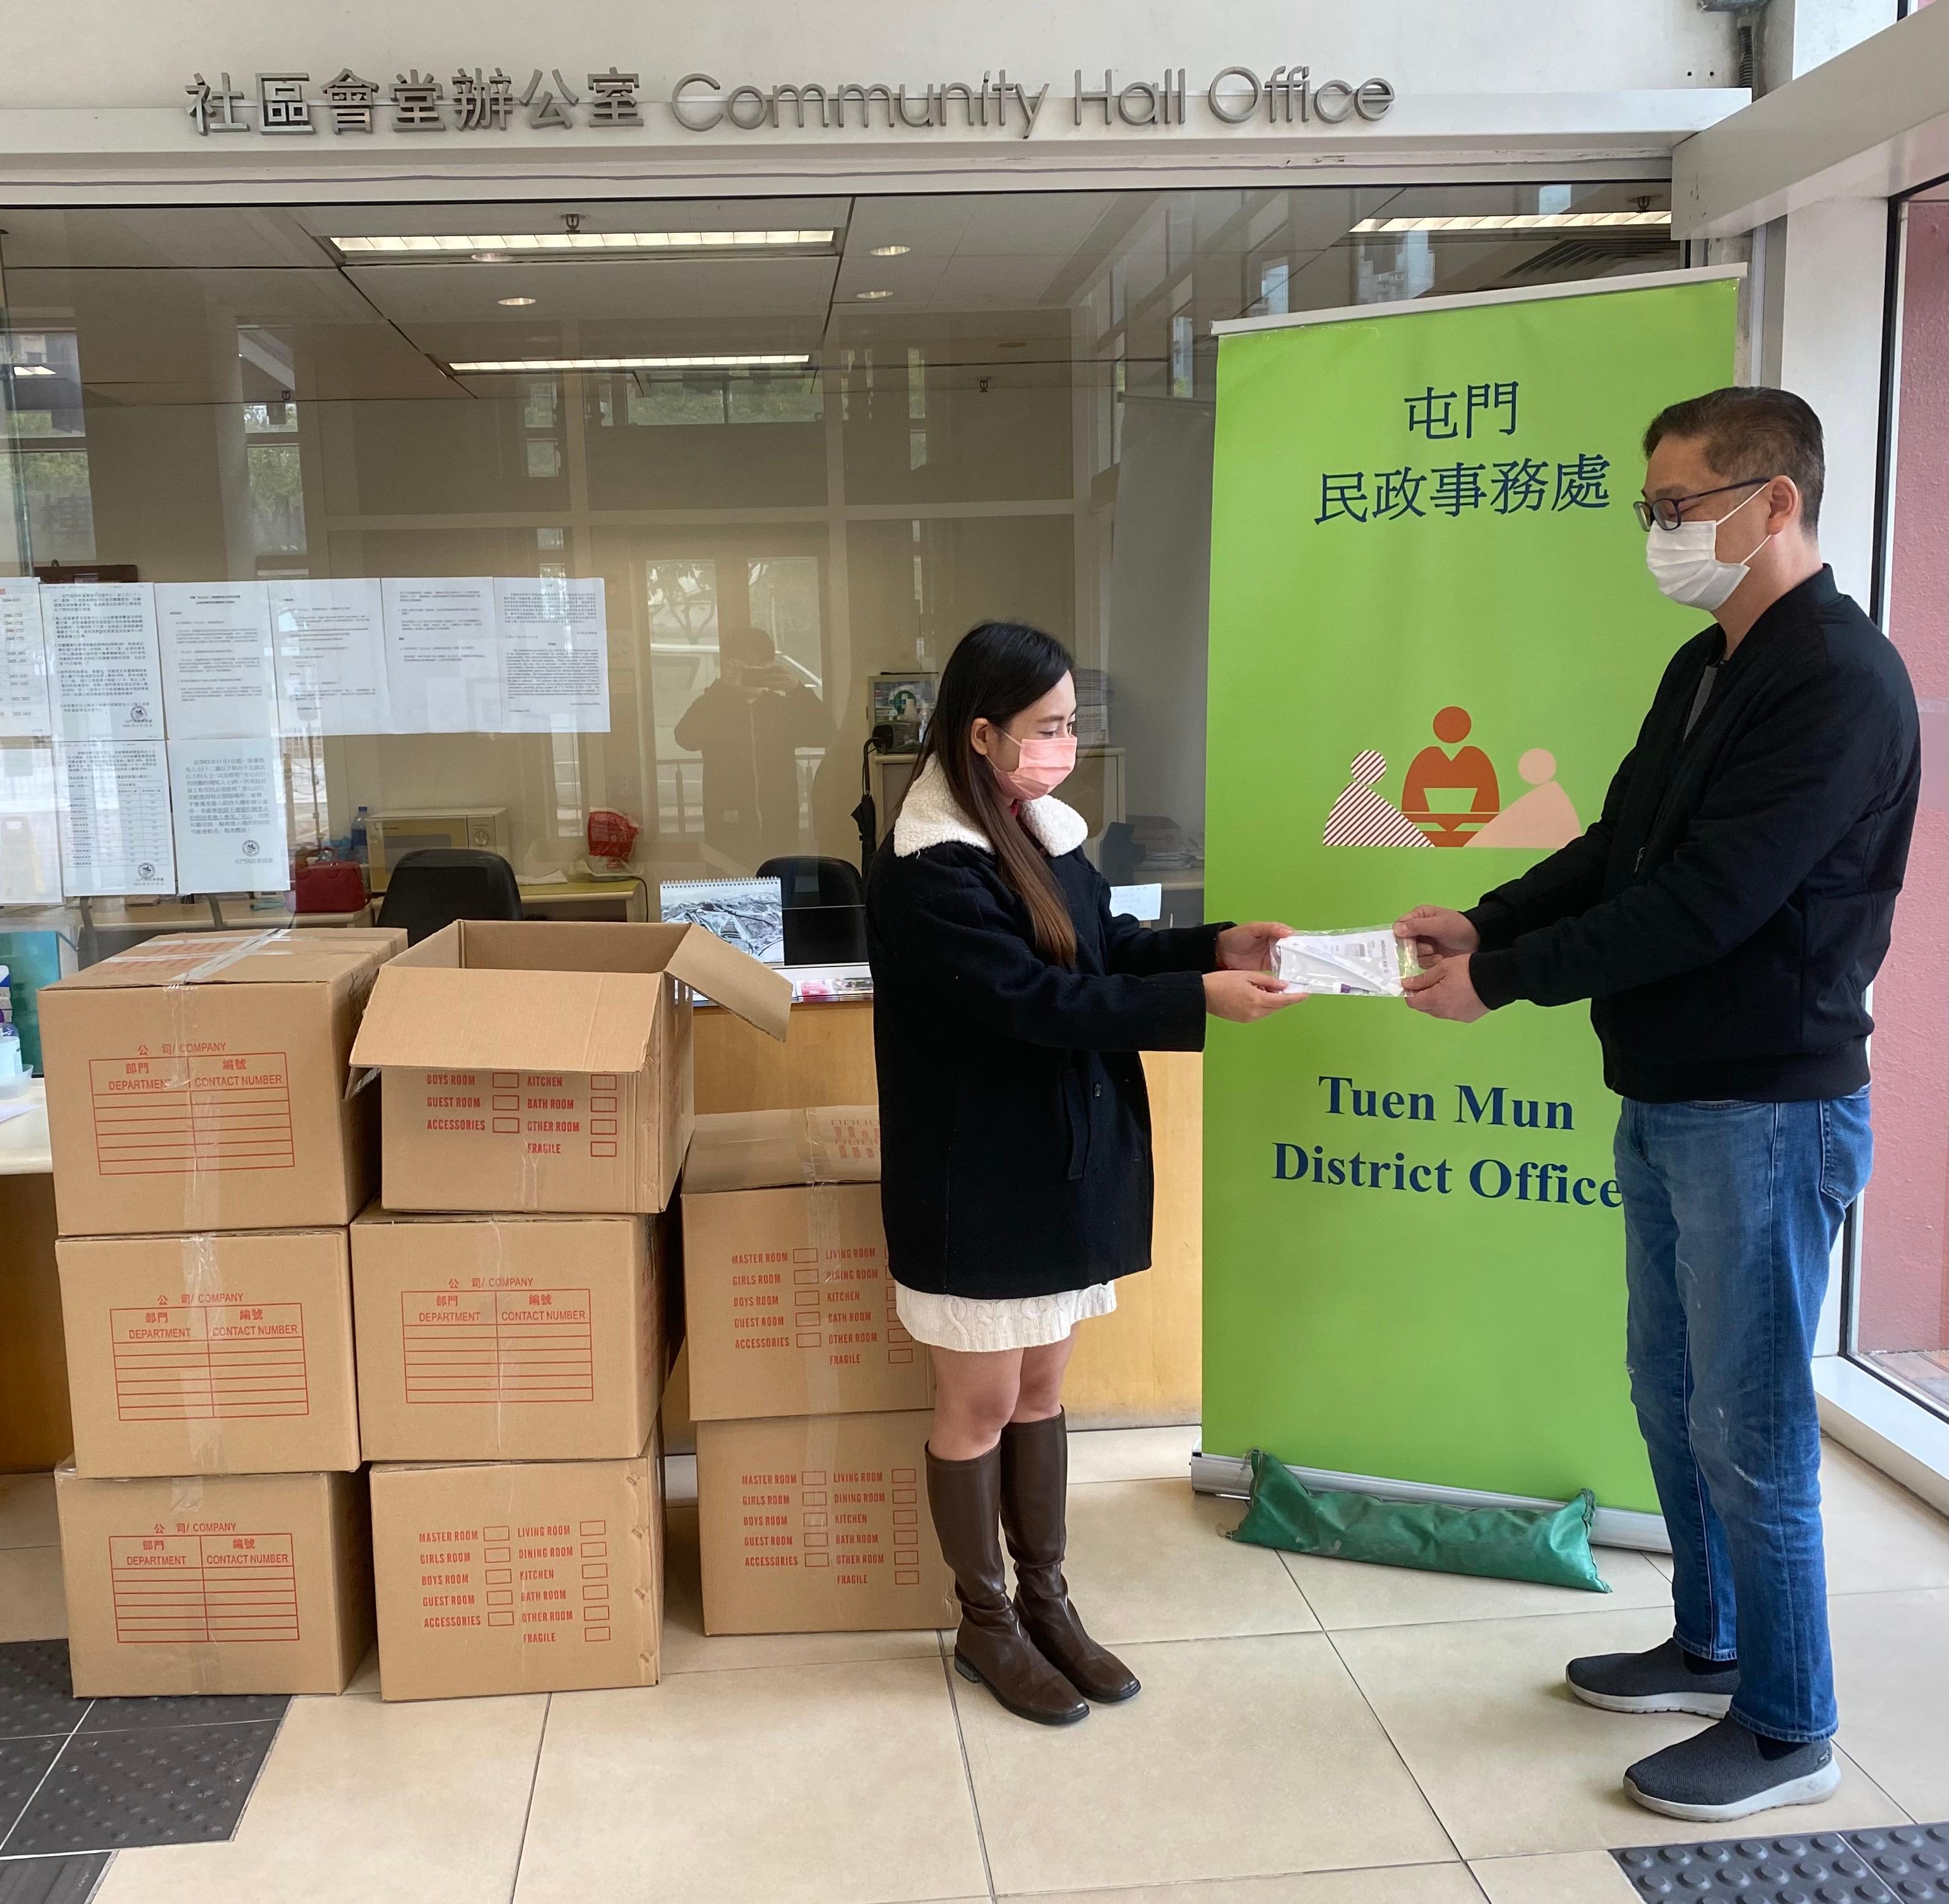 The Tuen Mun District Office today (February 2) started to distribute rapid test kits to cleansing workers and property management staff working within the Sewage Testing Area Tuen Mun Sites for testing through property management companies.